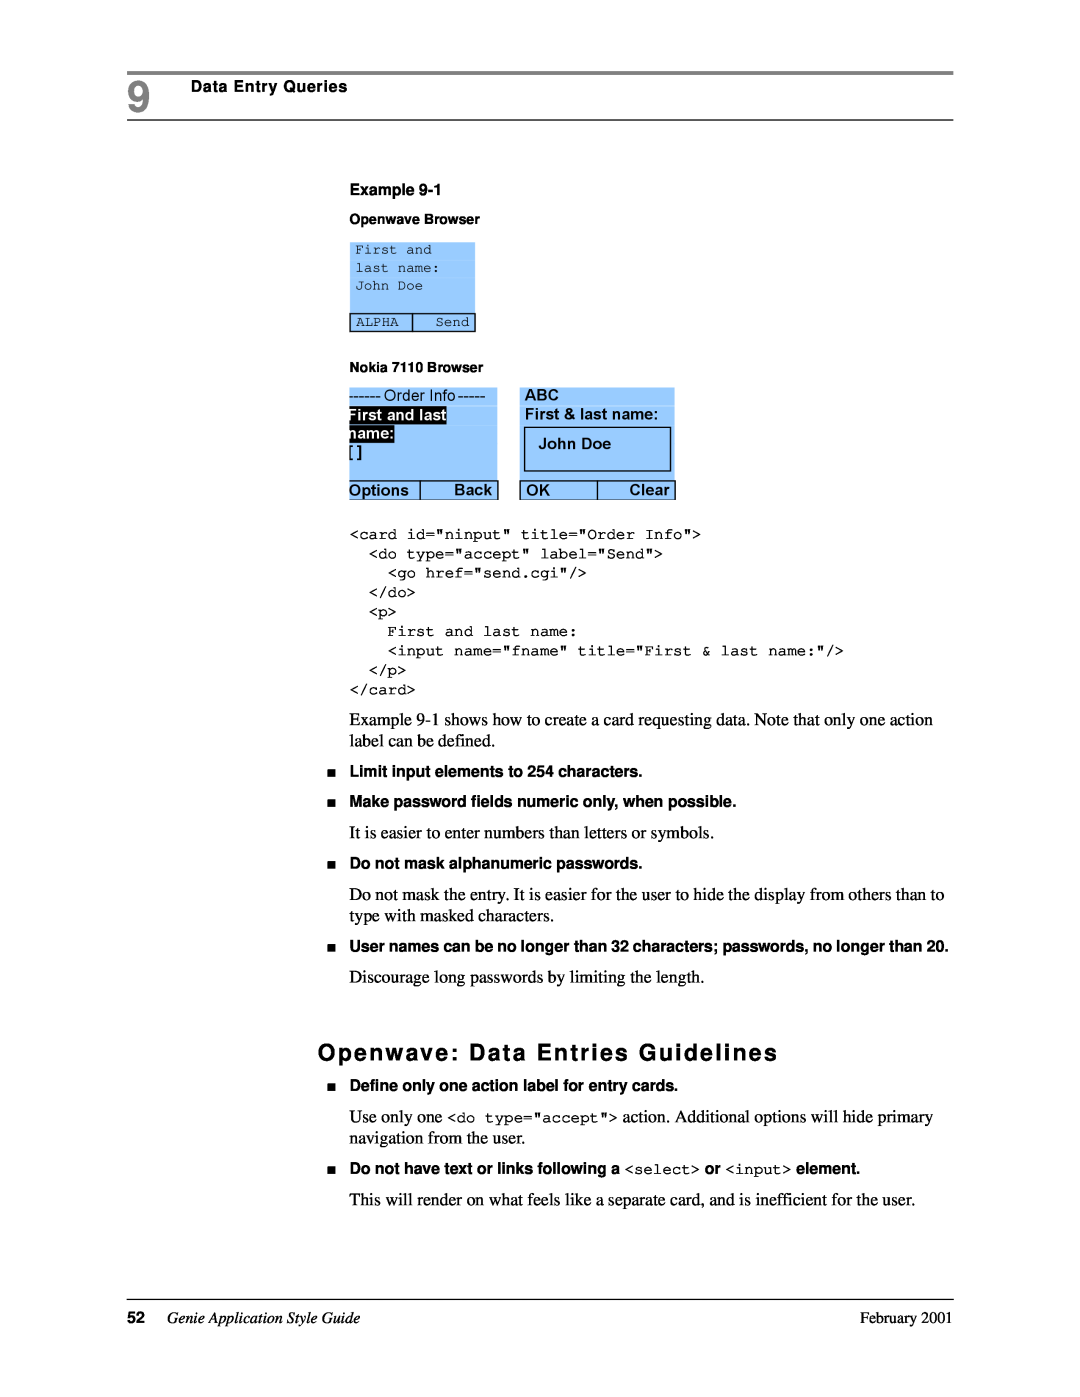 Genie 7110 manual Openwave Data Entries Guidelines 